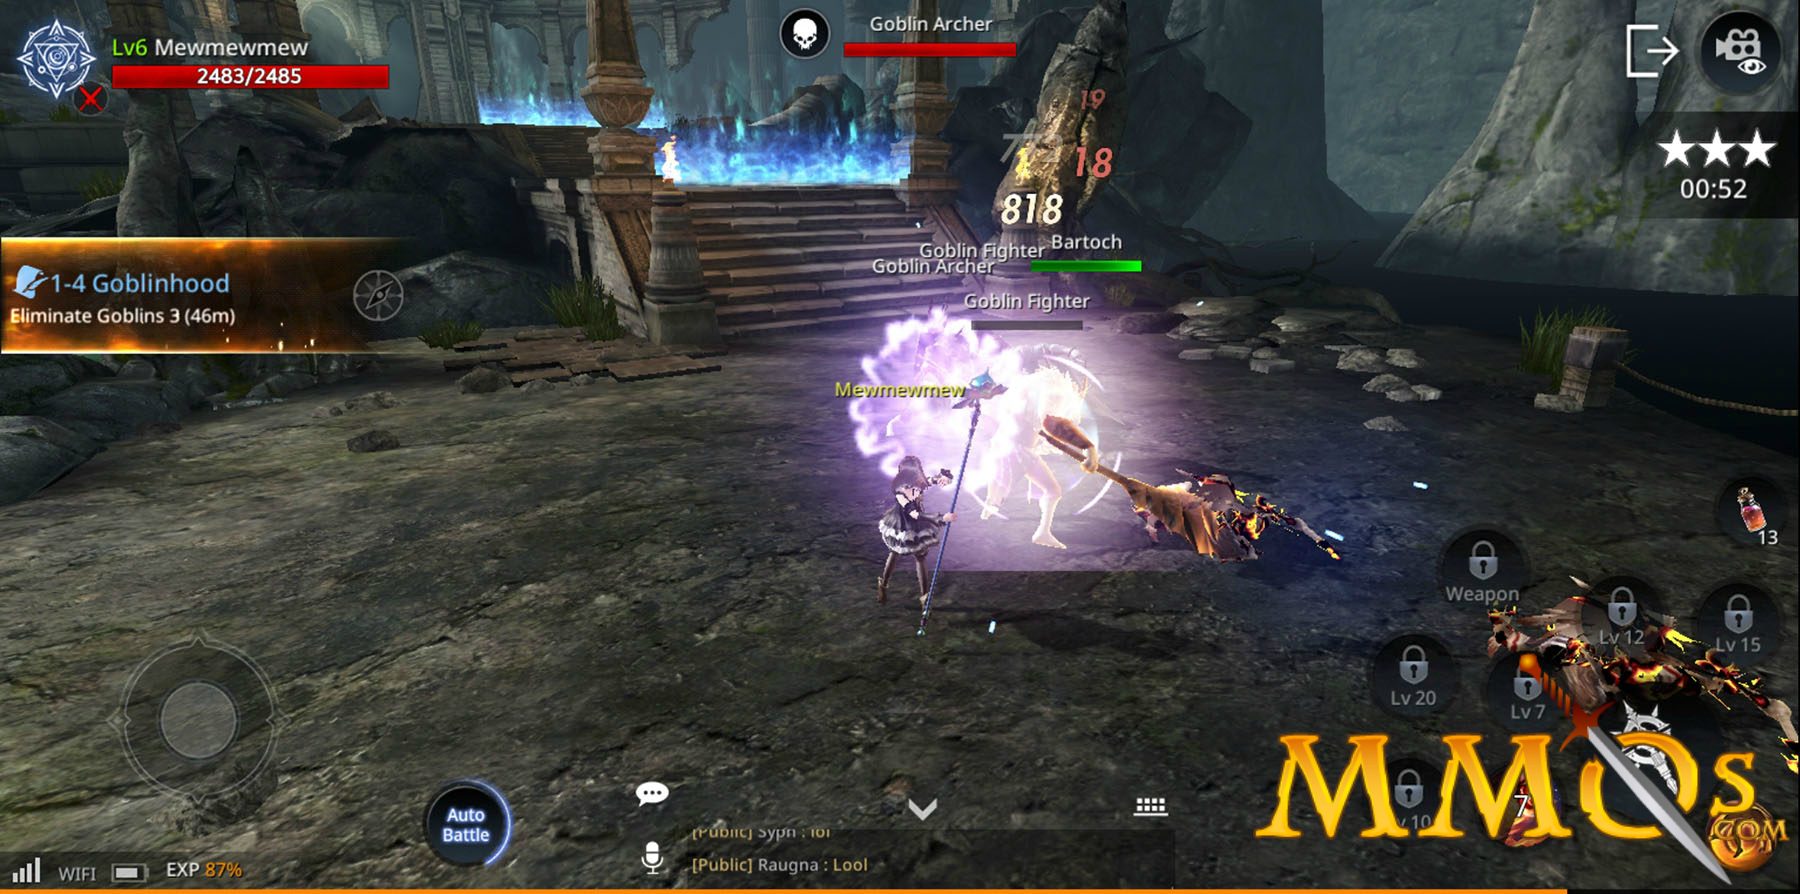 Ax E Alliance VS Empire Gameplay ( OPEN WORLD MMORPG) Android IOS